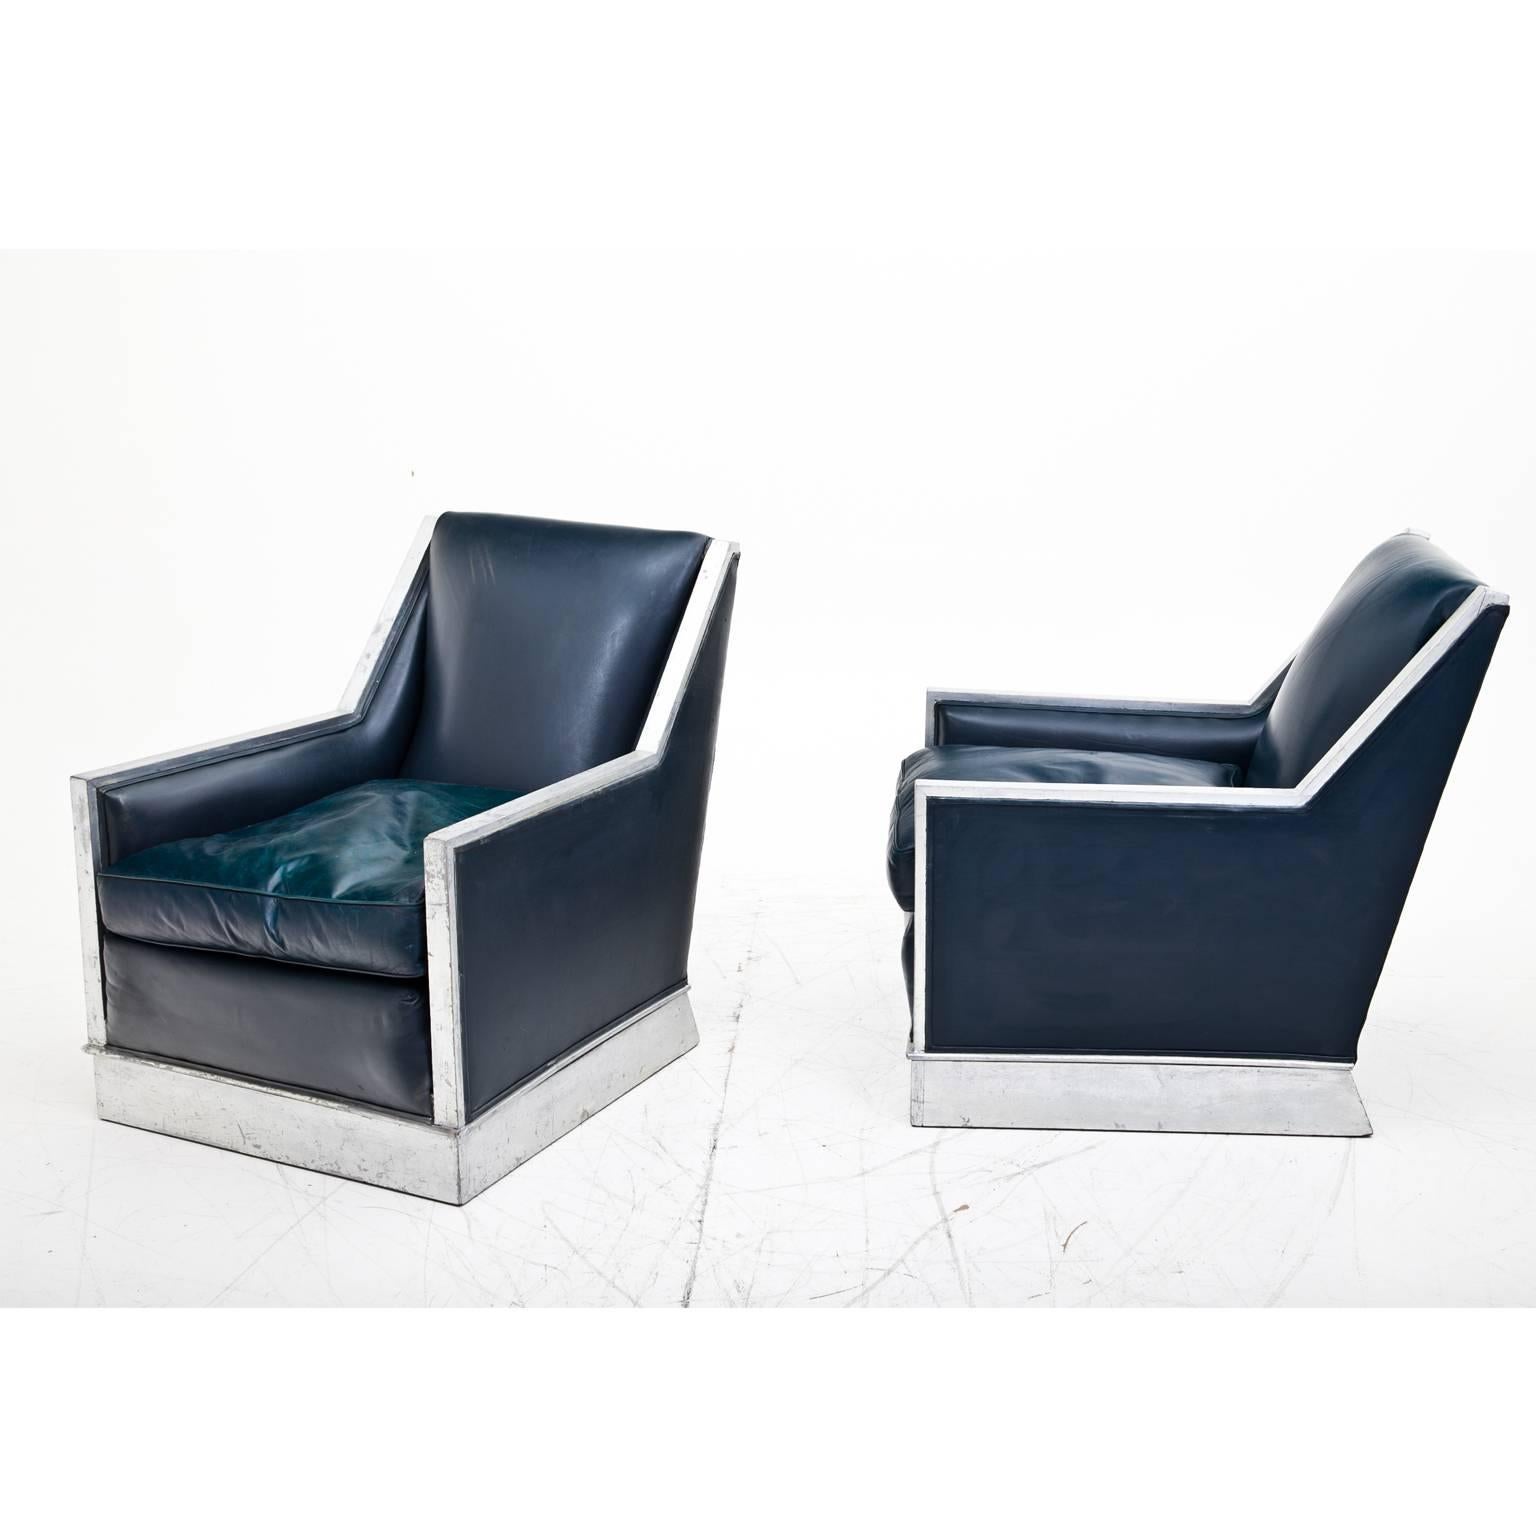 Pair of Art Deco armchairs in an original condition with silvered armrests and stands. The armchairs are upholstered with an old dark blue leather and the silver was carefully cleaned.